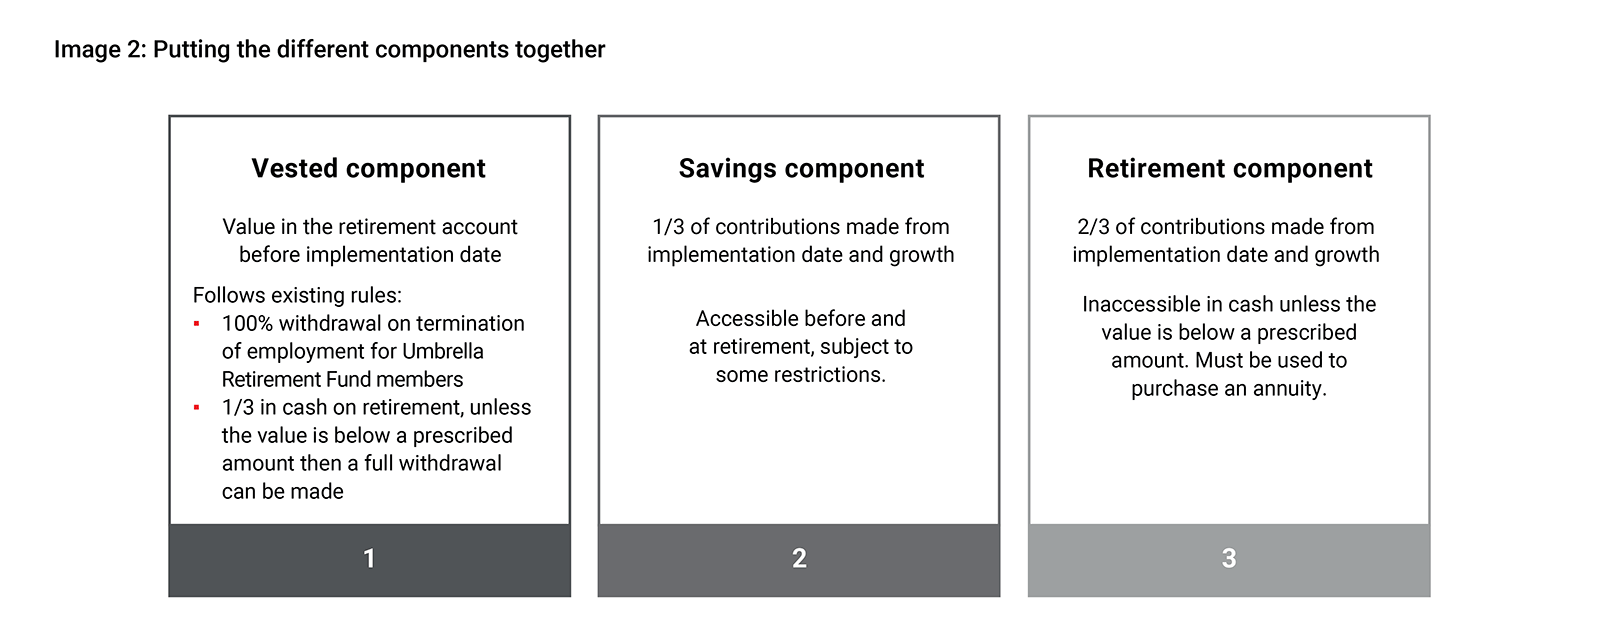 Image showing the vested, savings and retirement components